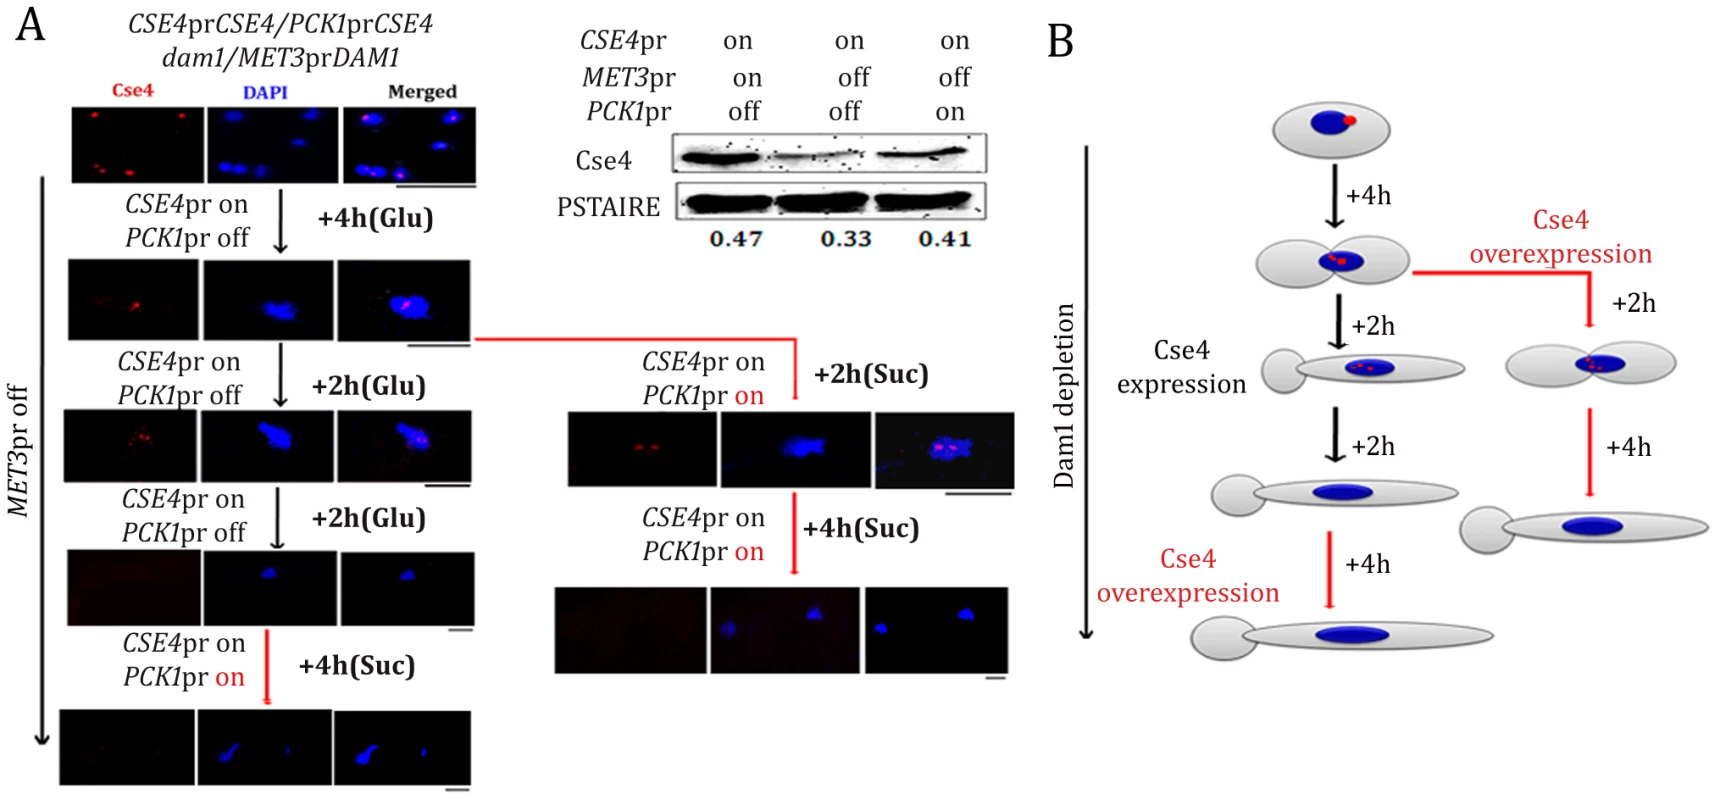 Kinetochore localization of newly synthesized CENP-A/Cse4 is compromised in absence of wild-type levels of Dam1.